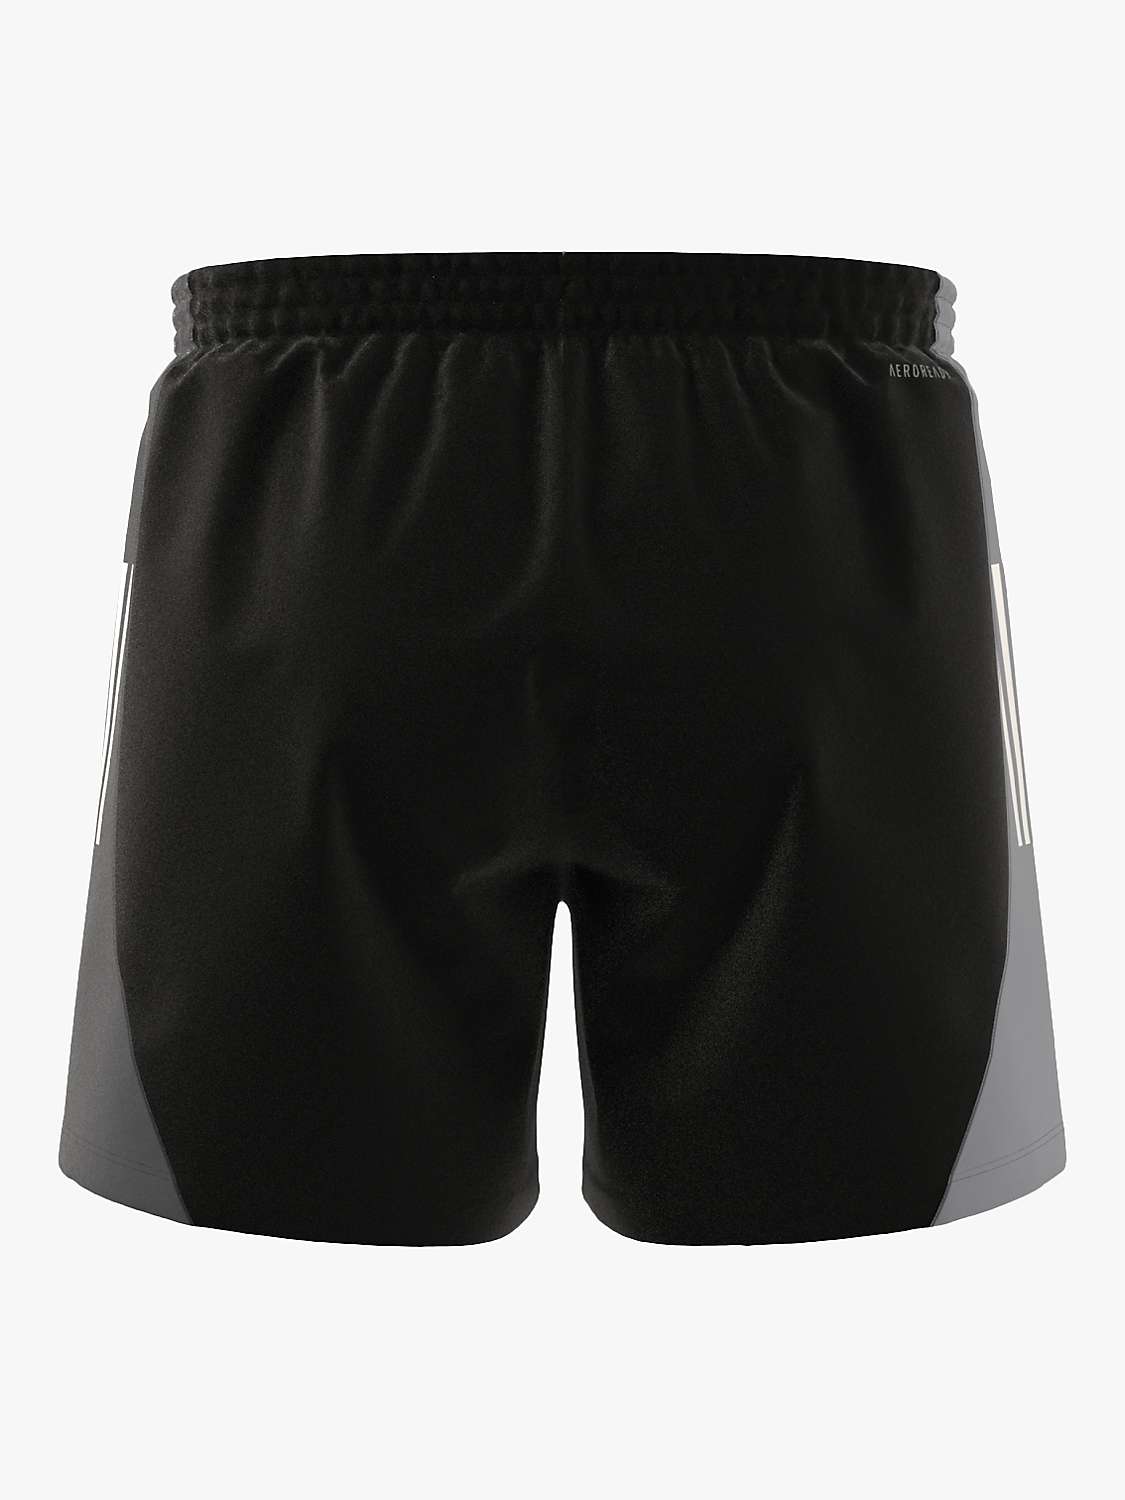 Buy adidas Own The Run Colour Block Zip Running Shorts, Black/Halo Silver Online at johnlewis.com